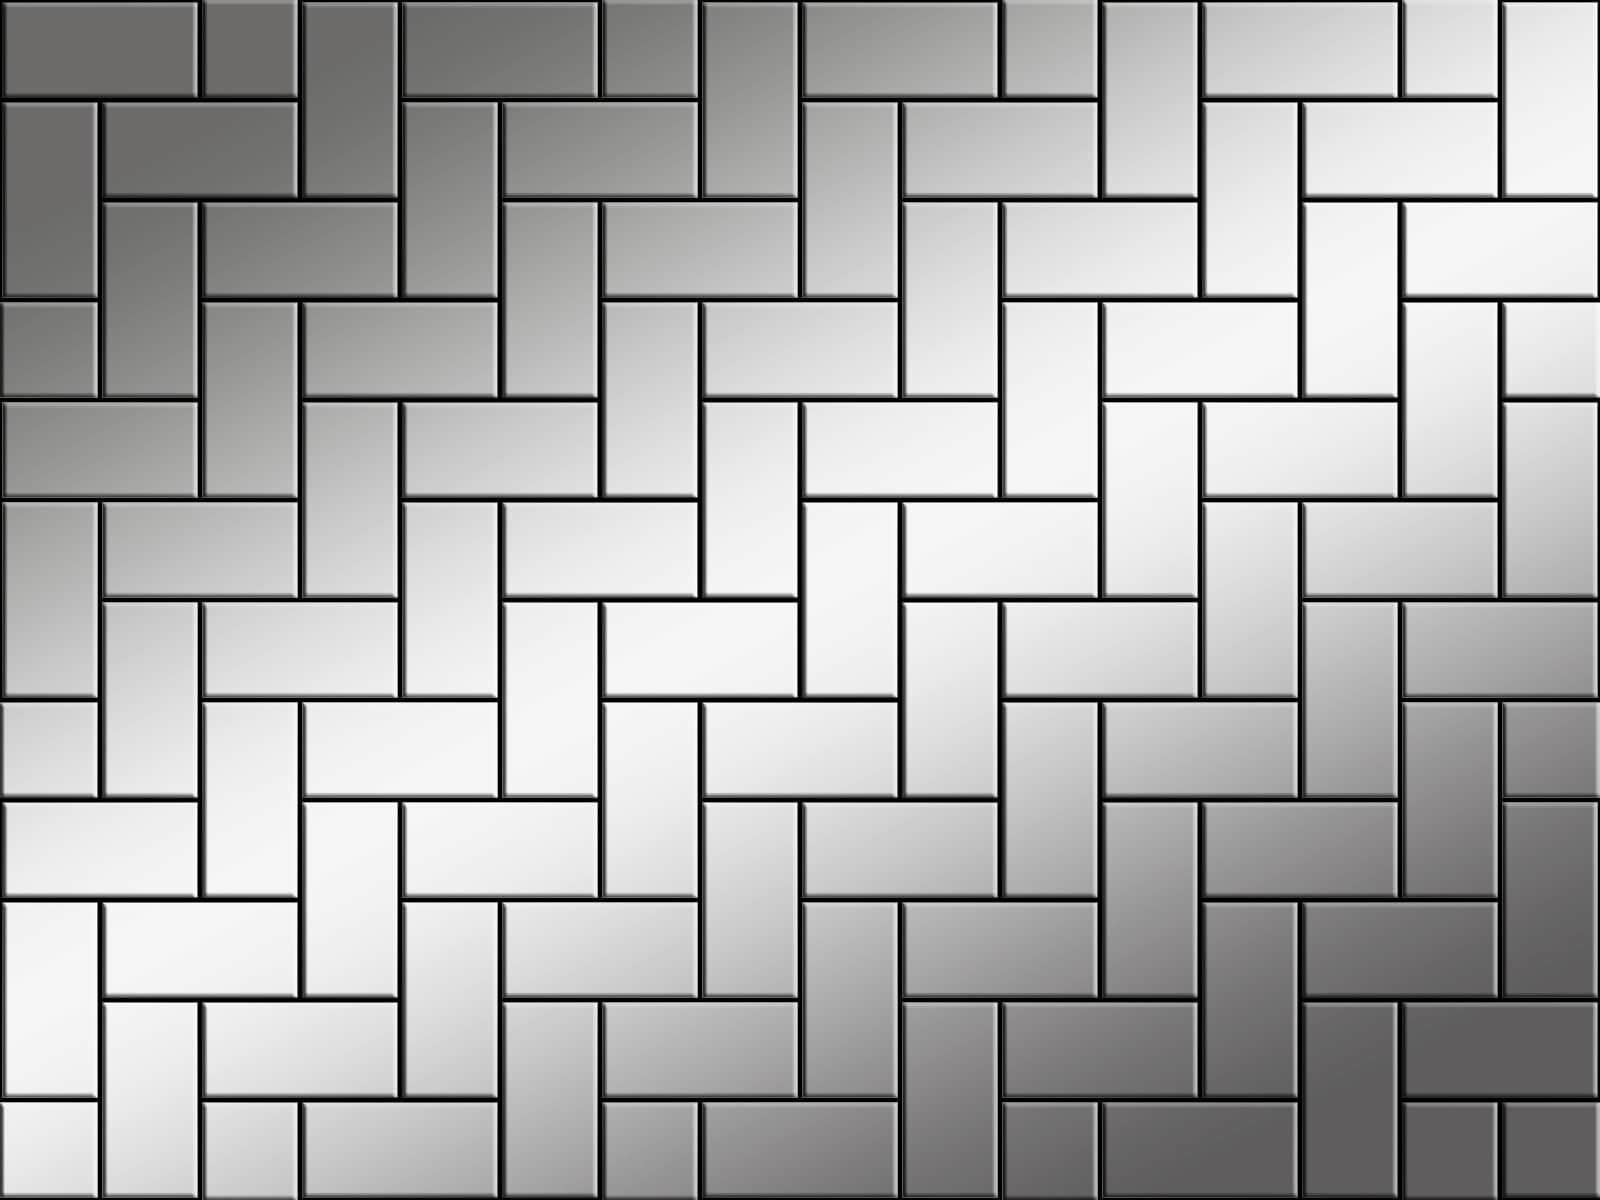 Tiling brick pattern or straight